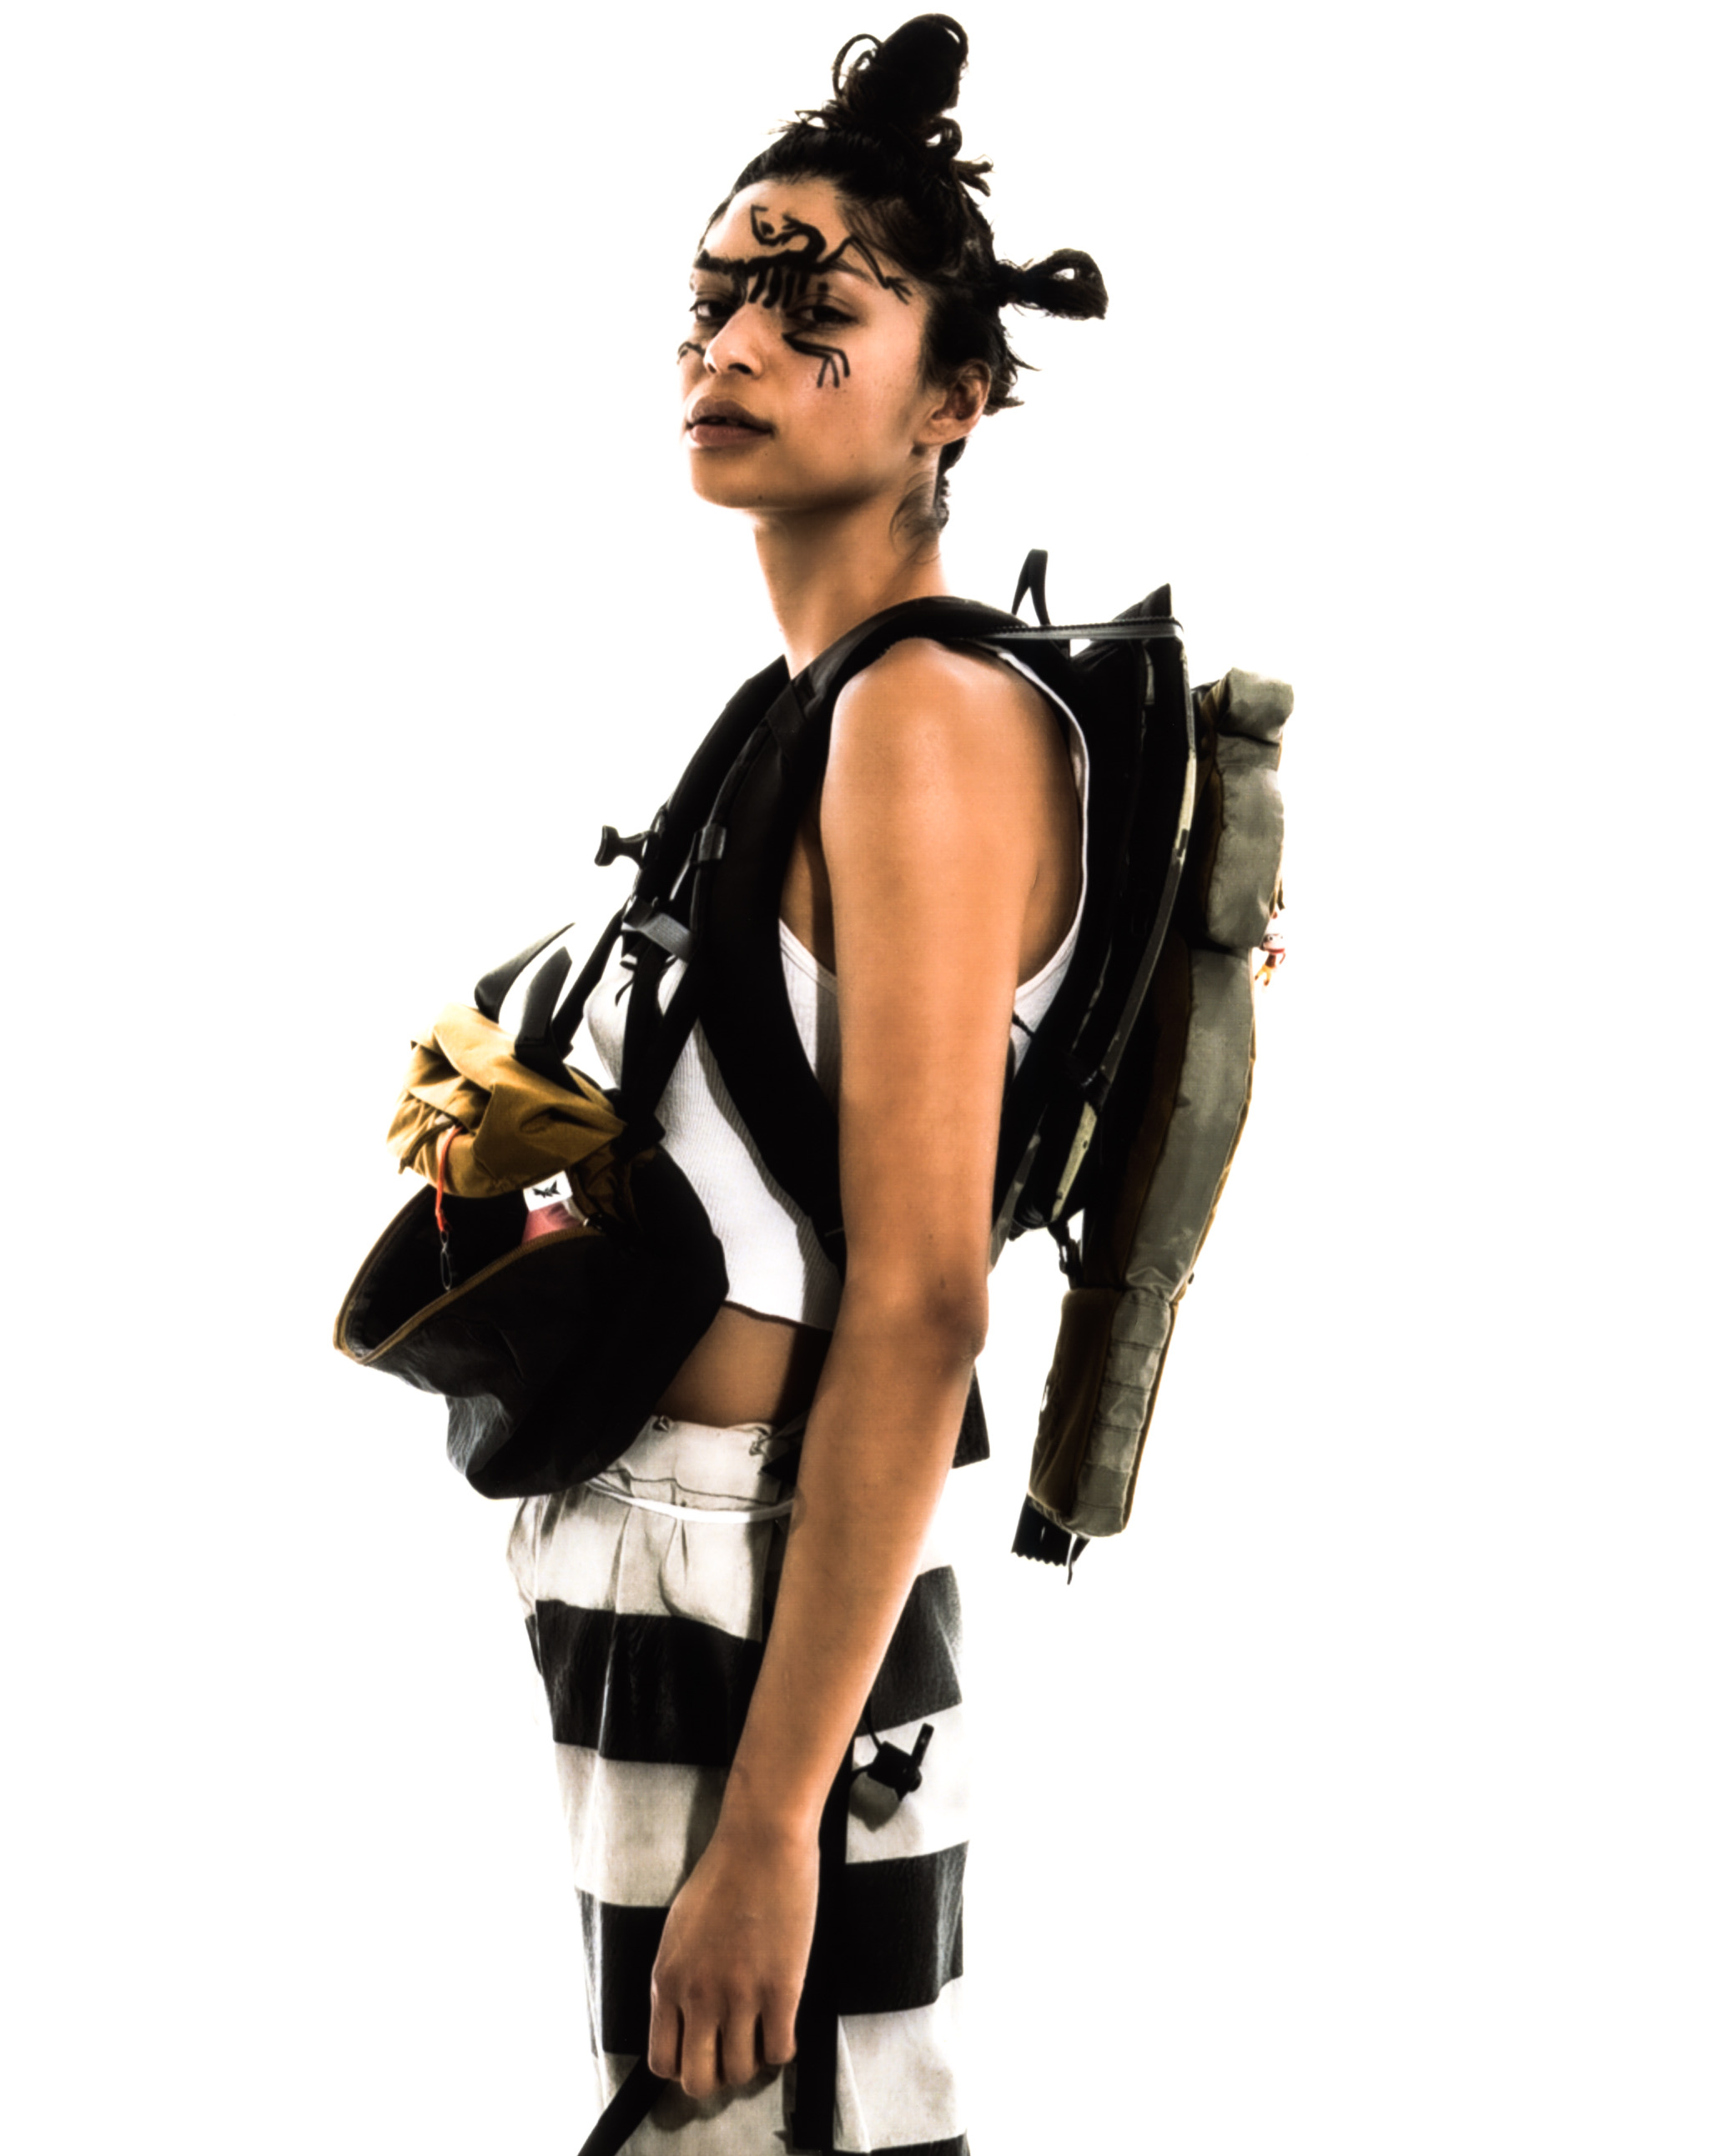 Model towards the camera wearing a structred backpack with striped pants and white tanktop against a white background